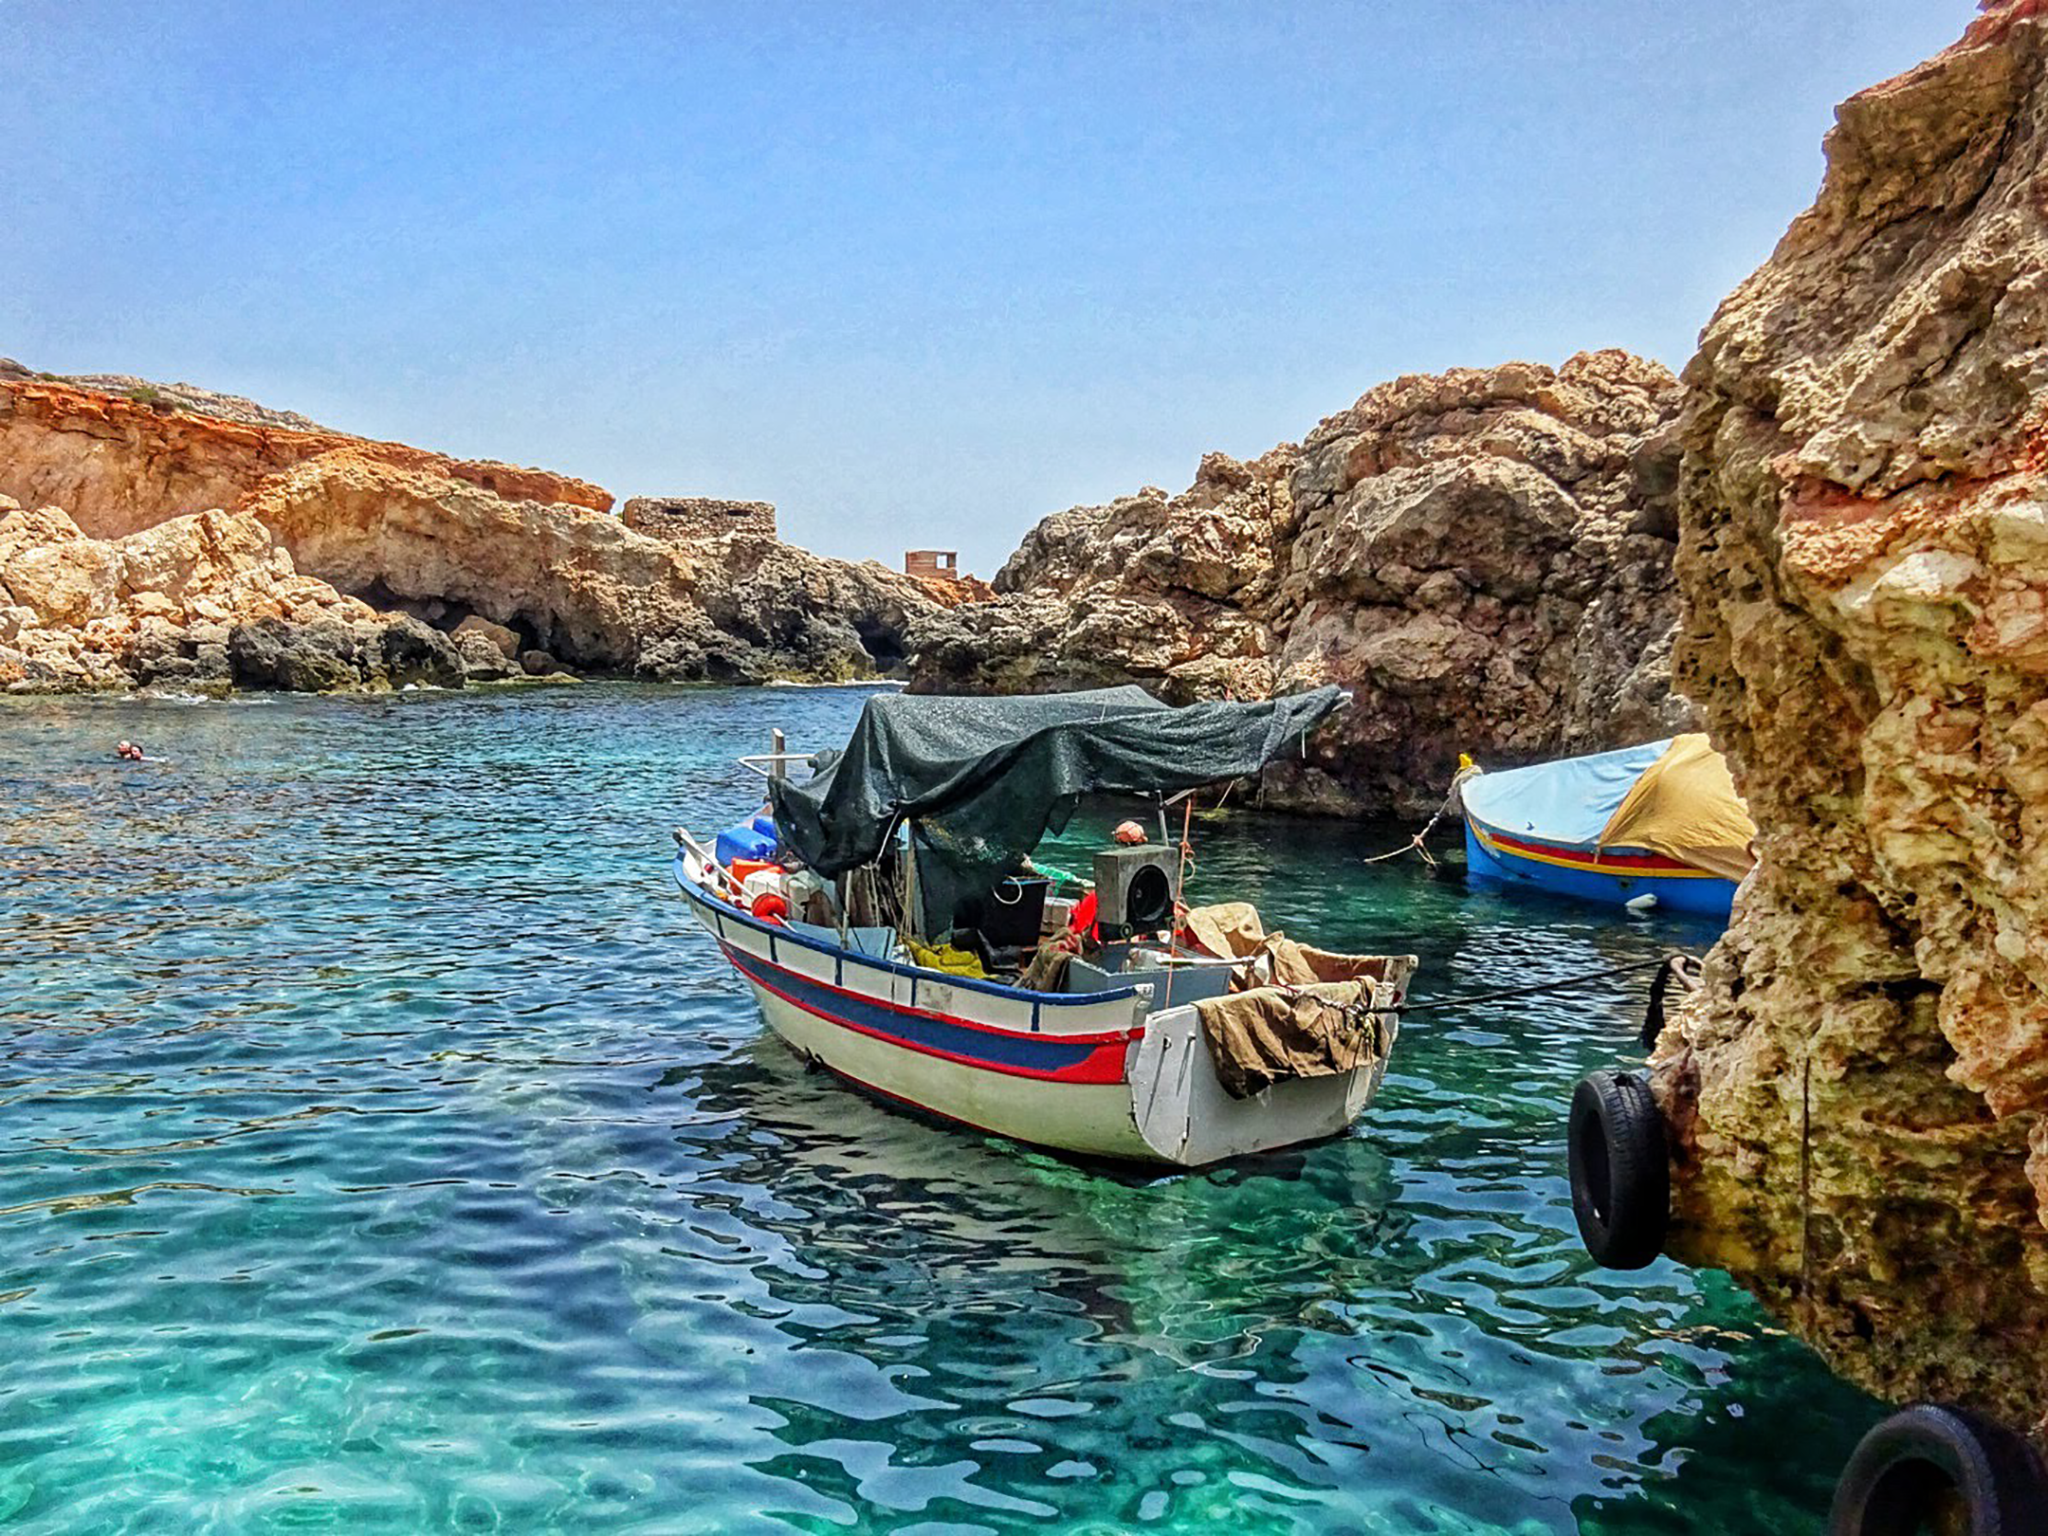 Ghar Lapsi is a small fishing village with a beautiful bay for swimming